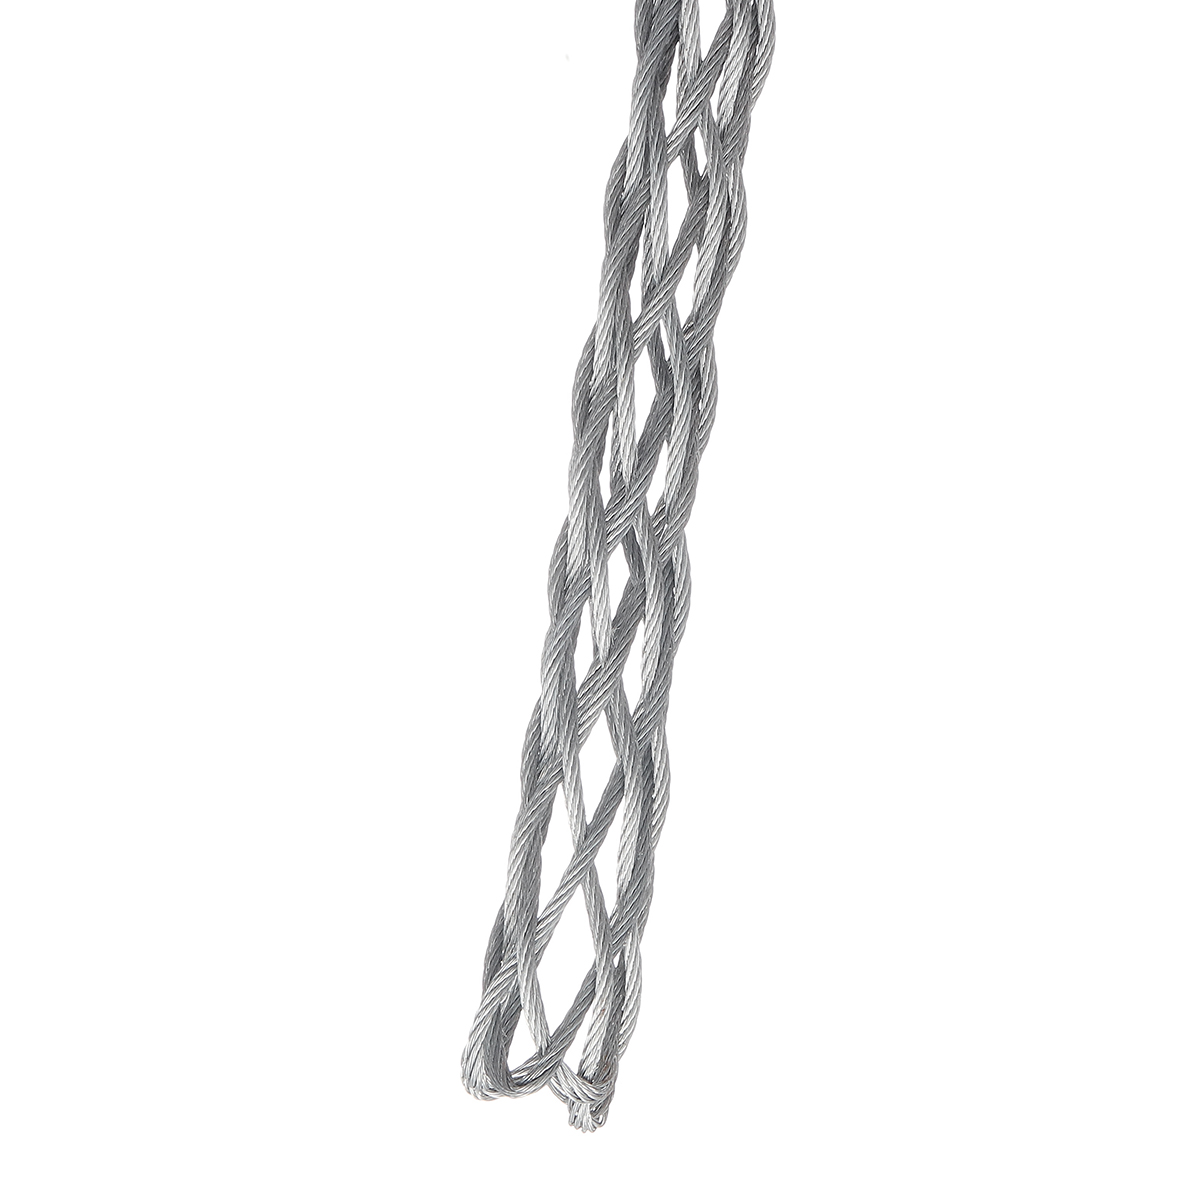 6-Sizes-6-50mm-Wire-Cable-Pulling-Socks-Grip-For-Telstra-NBN-Tools-Heavy-Duty-1338483-5